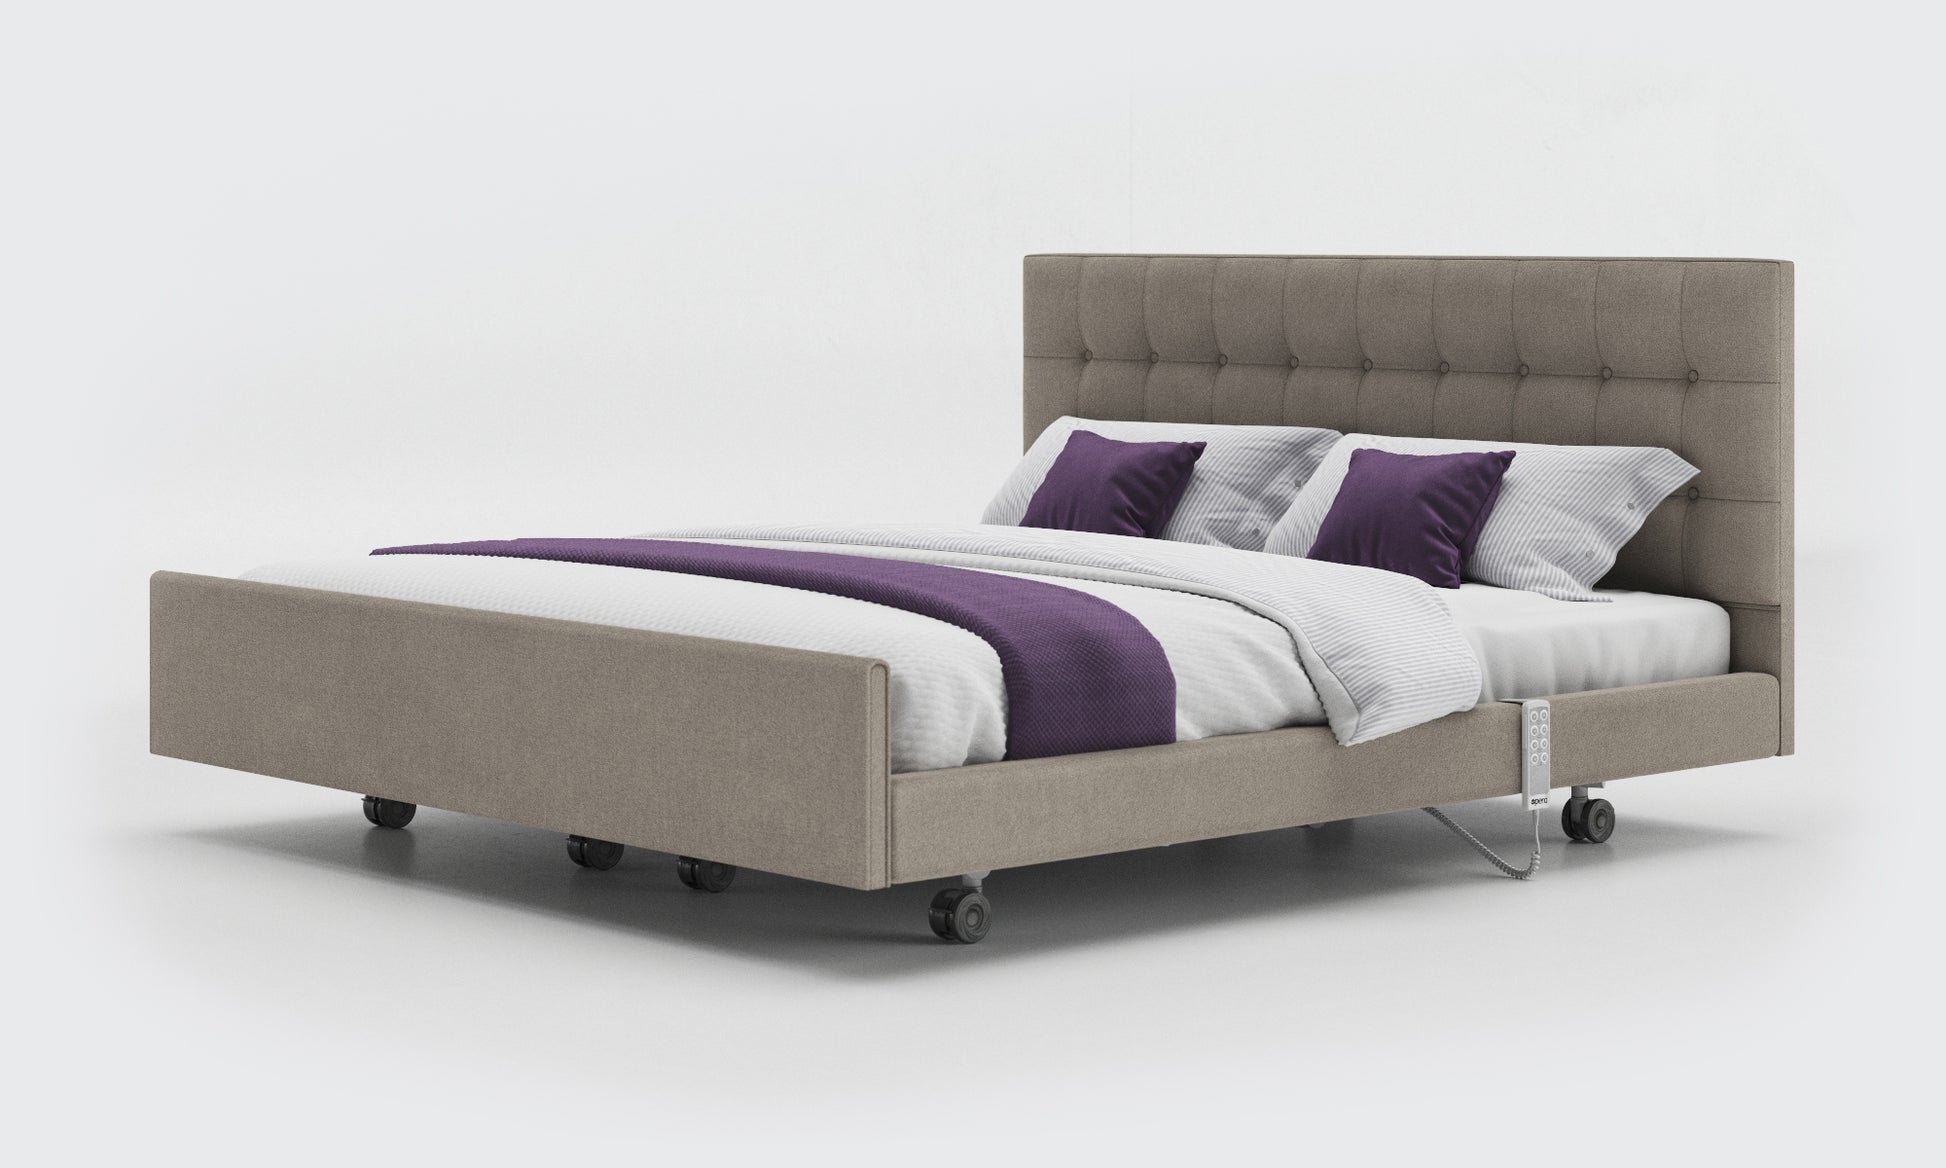 Zinc Fabric Signature Comfort Dual Profiling Bed With a Pearl Headboard